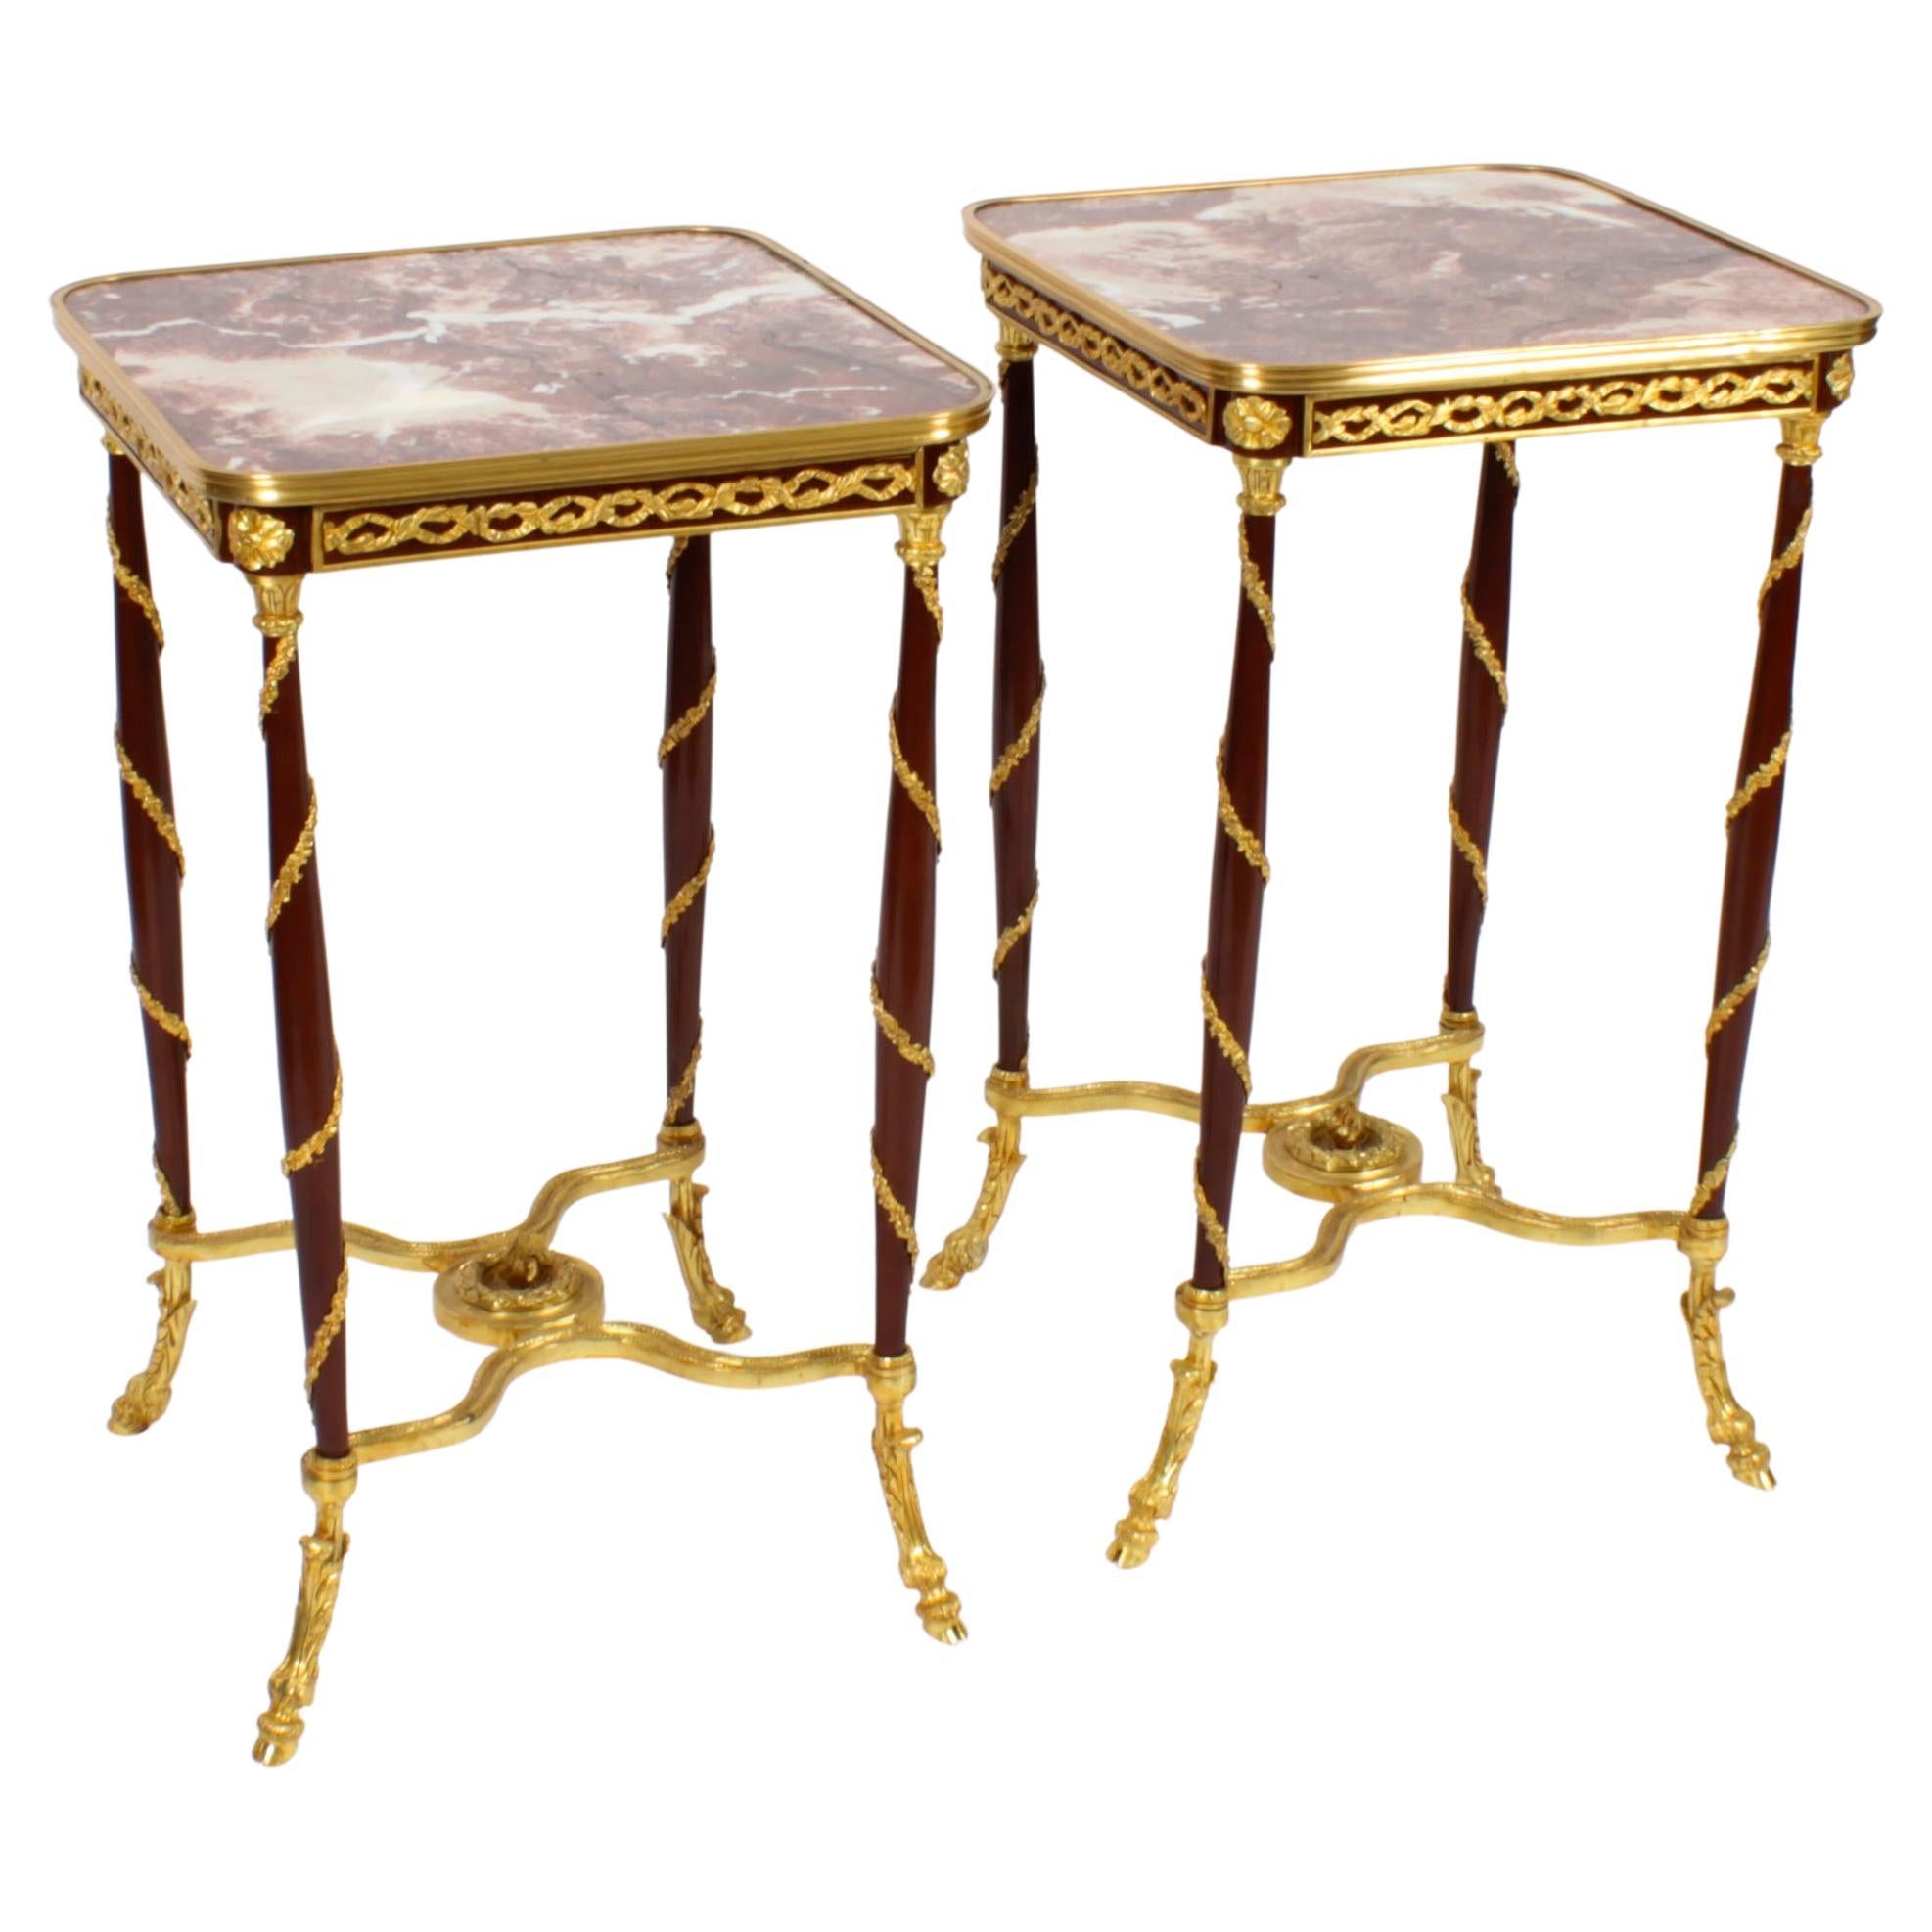 Vintage Pair of French Louis Revival Ormolu Mounted Occasional Tables, 20th C For Sale